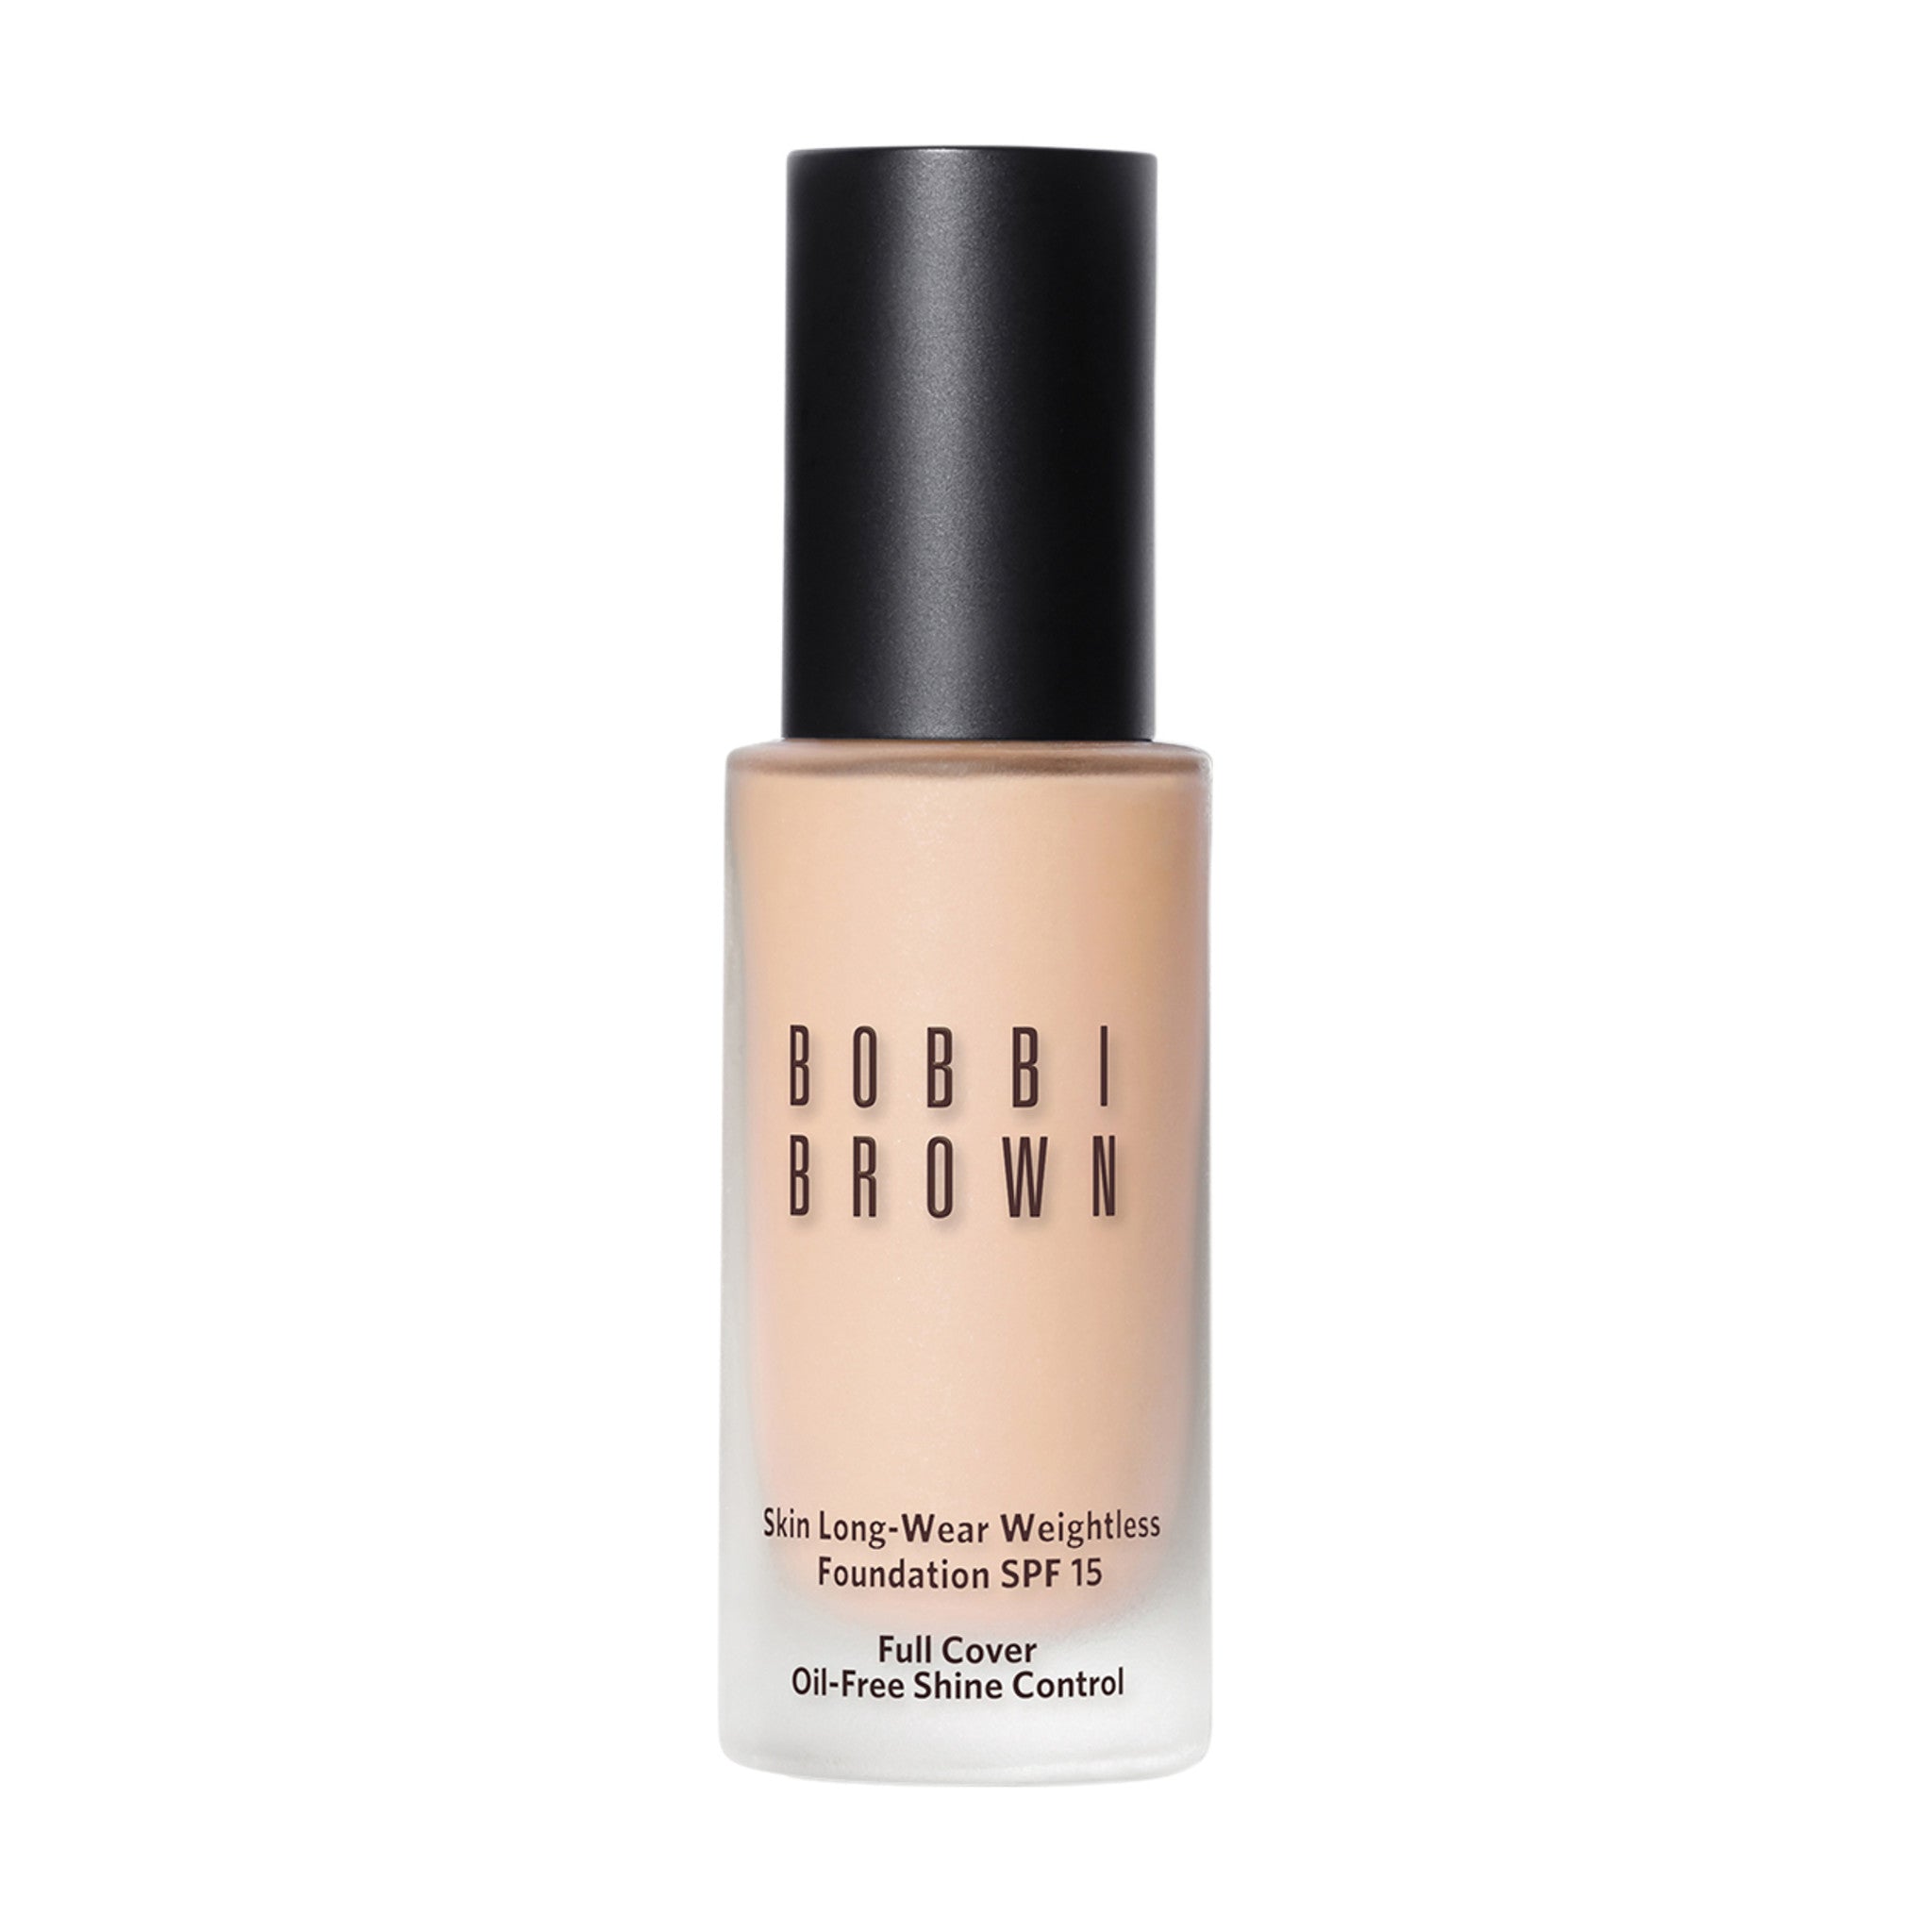 Bobbi Brown Skin Long-Wear Weightless Foundation SPF 15 Color/Shade variant: Neutral Porcelain (N-010) main image. This product is in the color nude, for light warm peach complexions